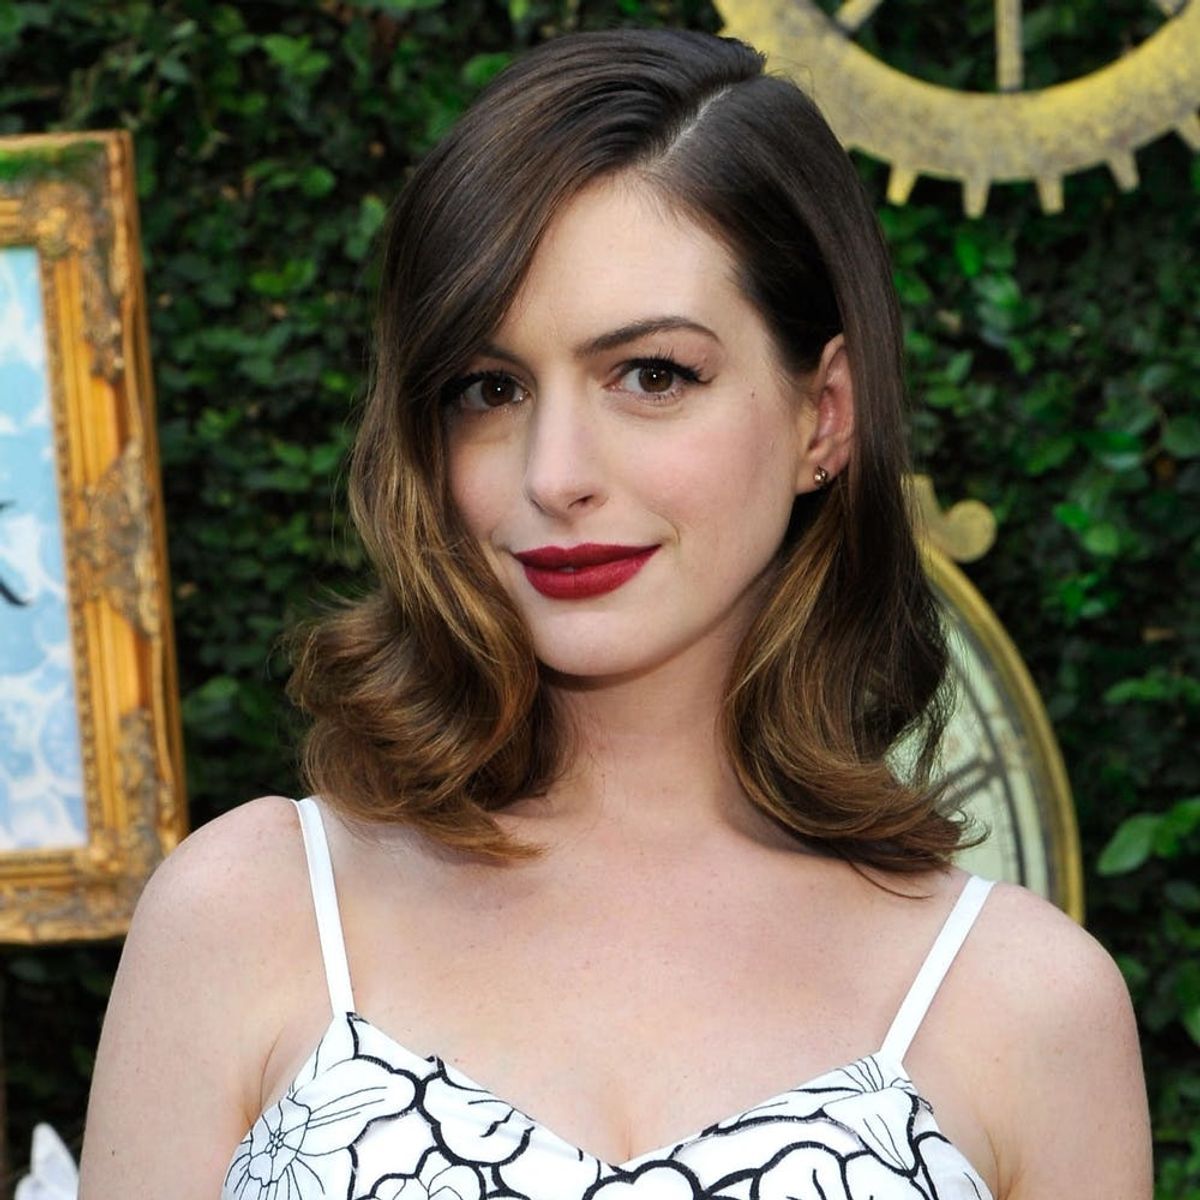 Anne Hathaway Preemptively Calls Out Would-Be Body Shamers: ‘It’s Not Me, It’s You’